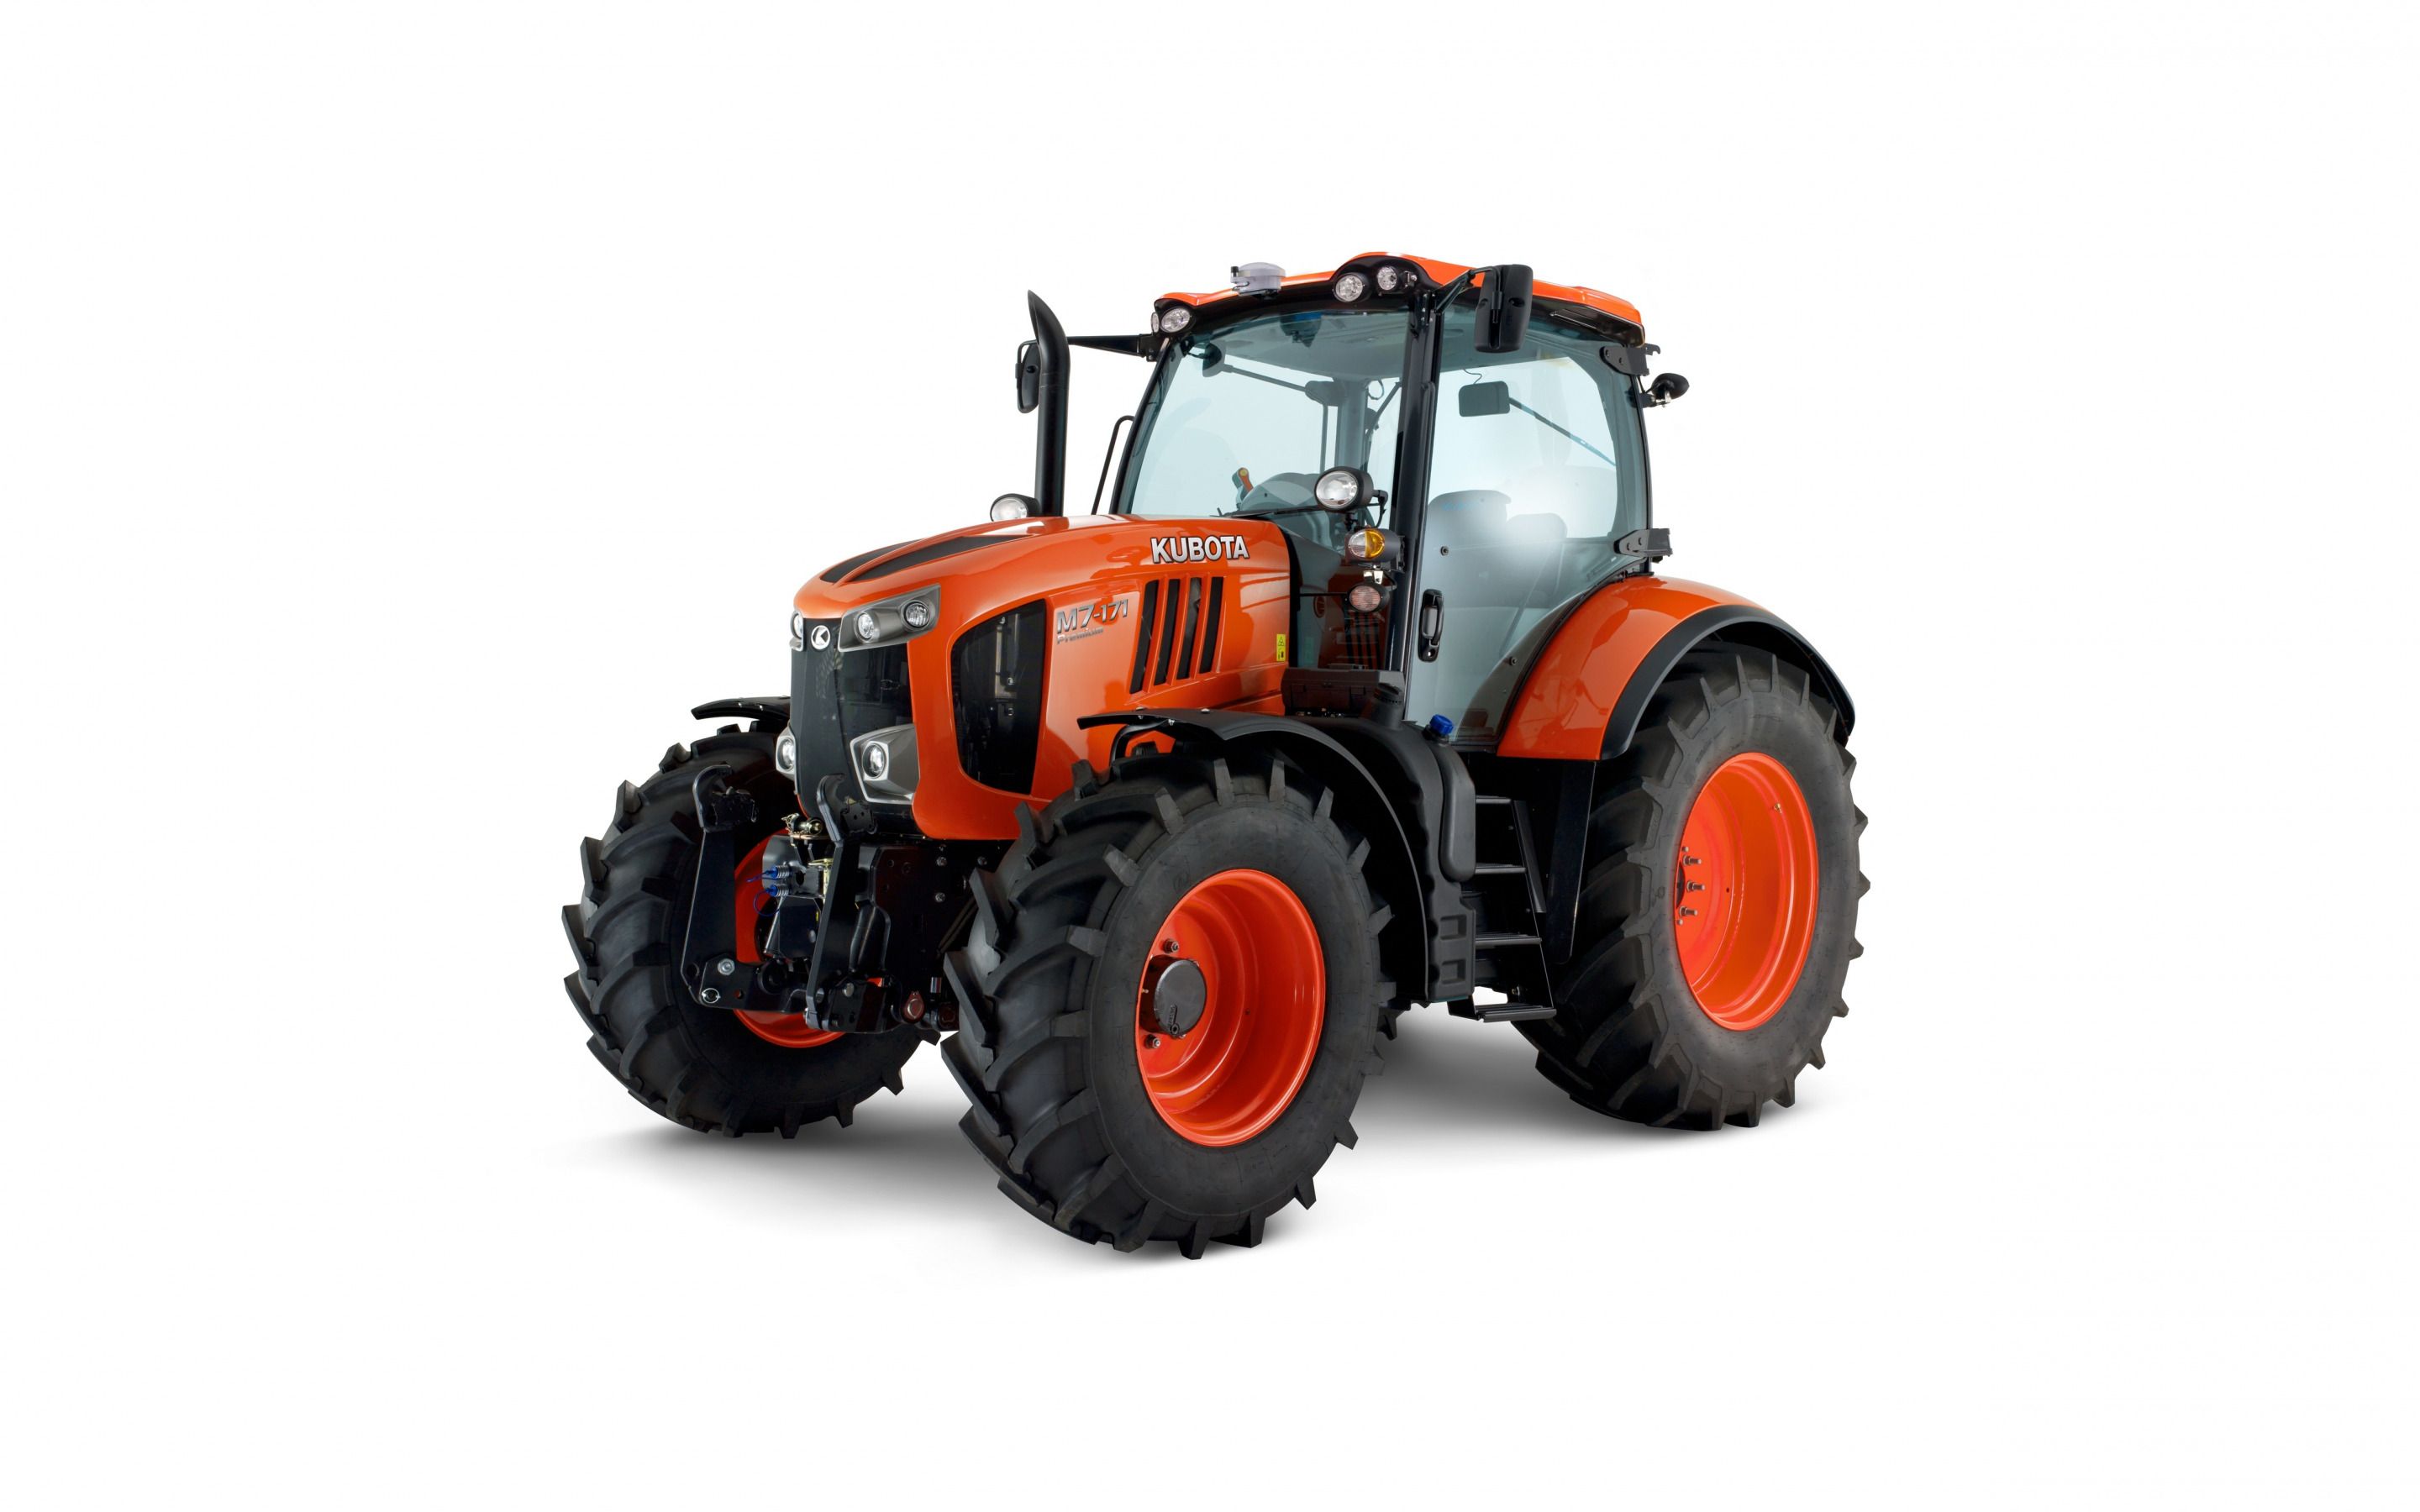 Download wallpaper Kubota M7- tractor, agricultural machinery